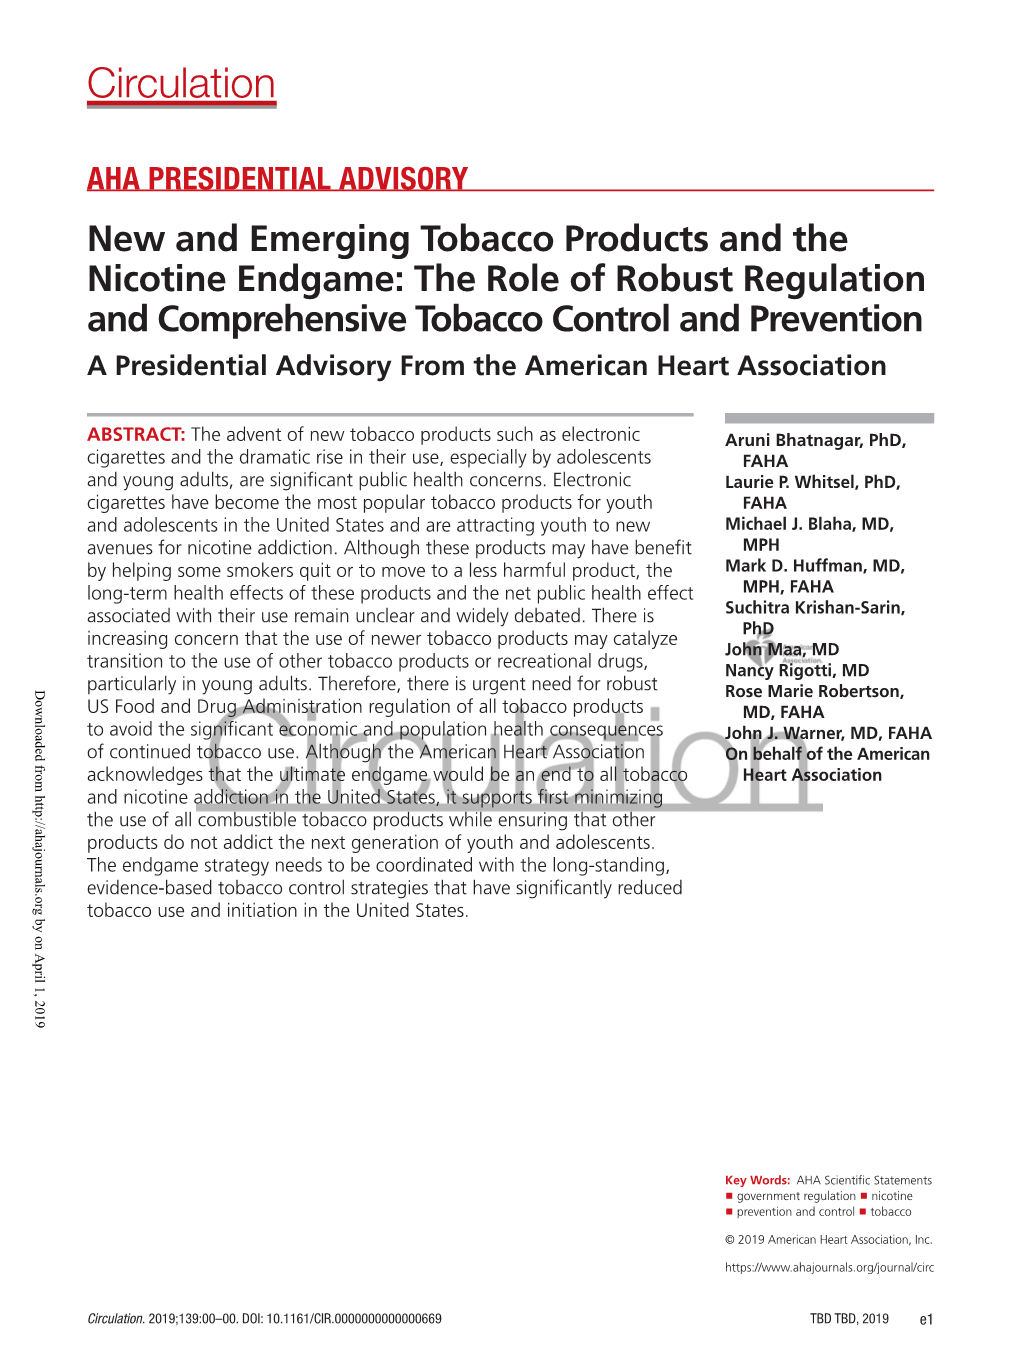 New and Emerging Tobacco Products